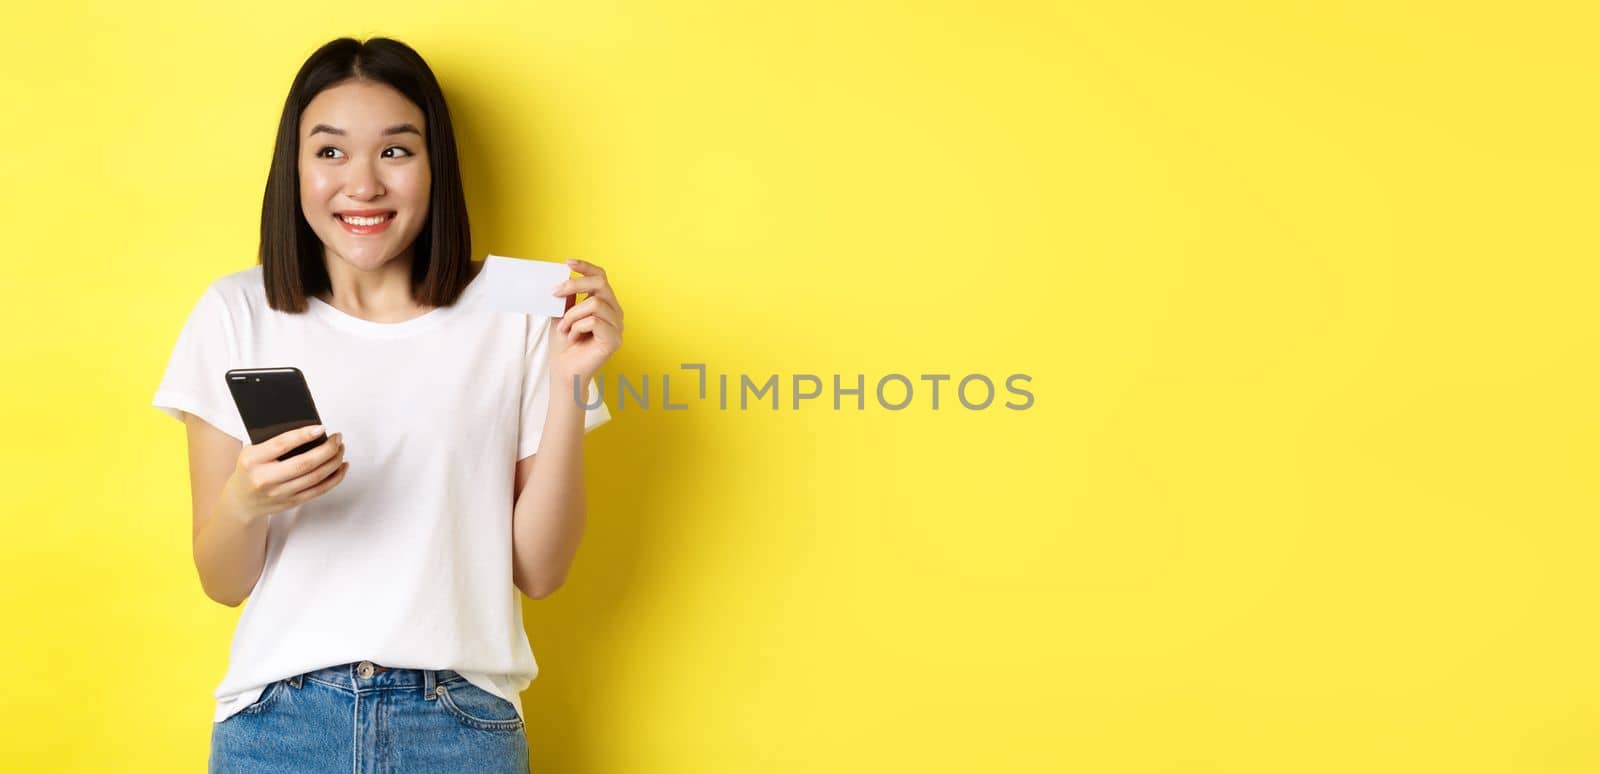 E-commerce and online shopping concept. Cheerful asian girl paying in internet, holding smartphone and plastic credit card, smiling and looking left, yellow background.